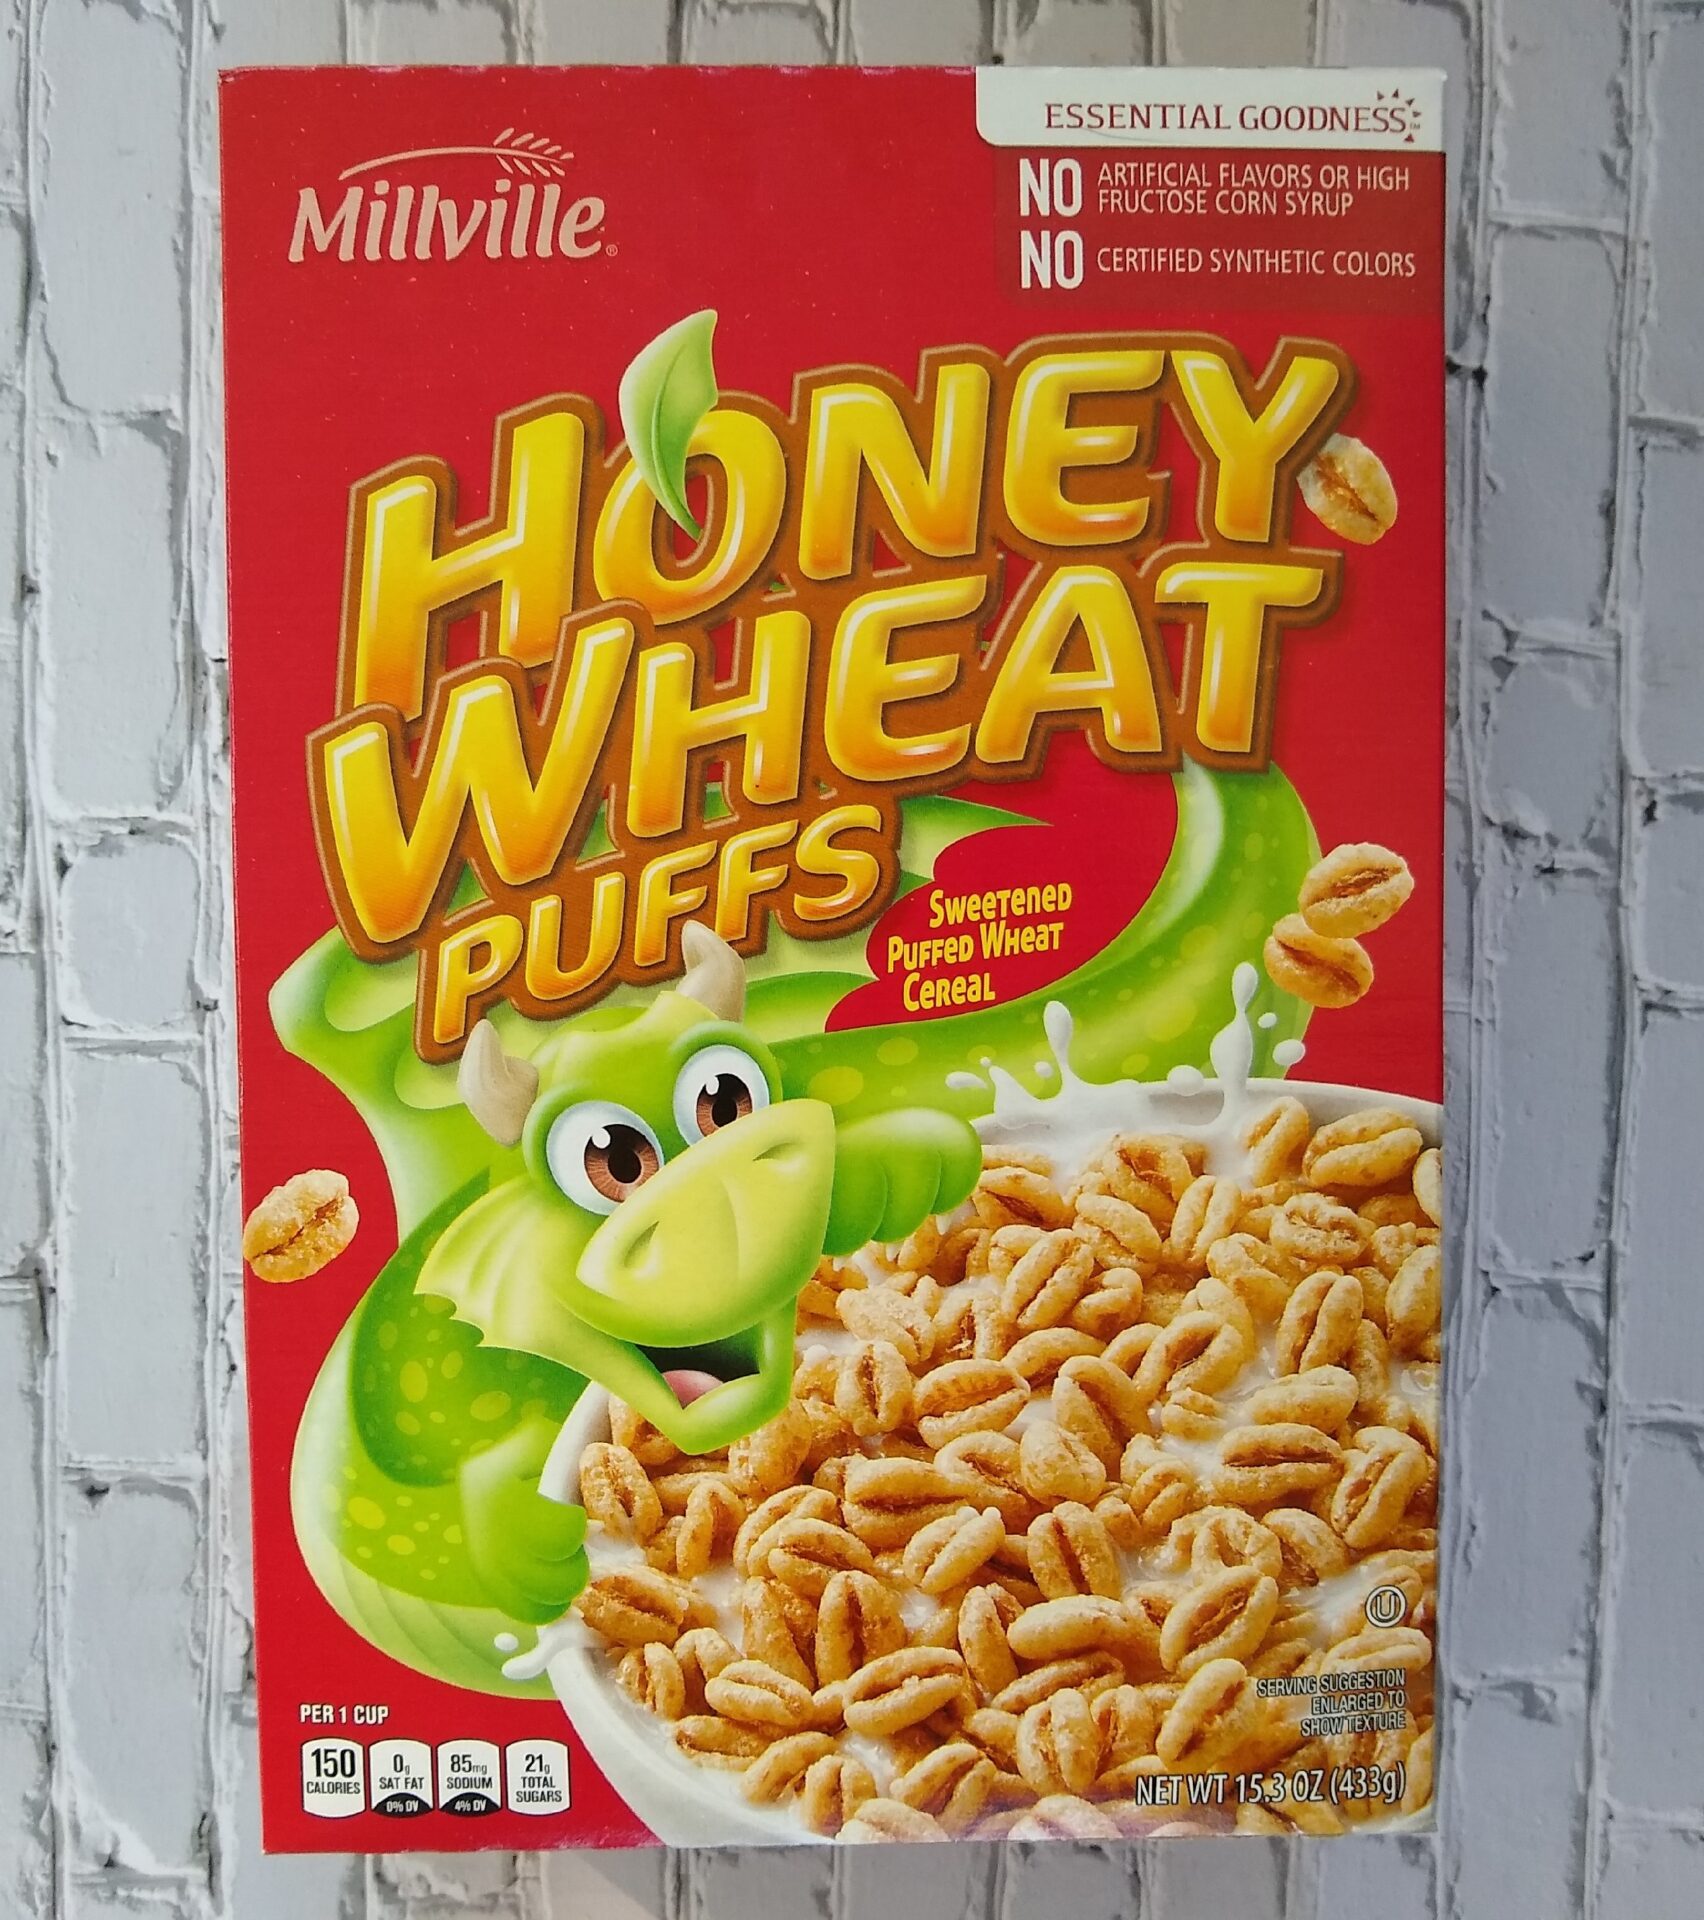 Off Brand Cereal Puff